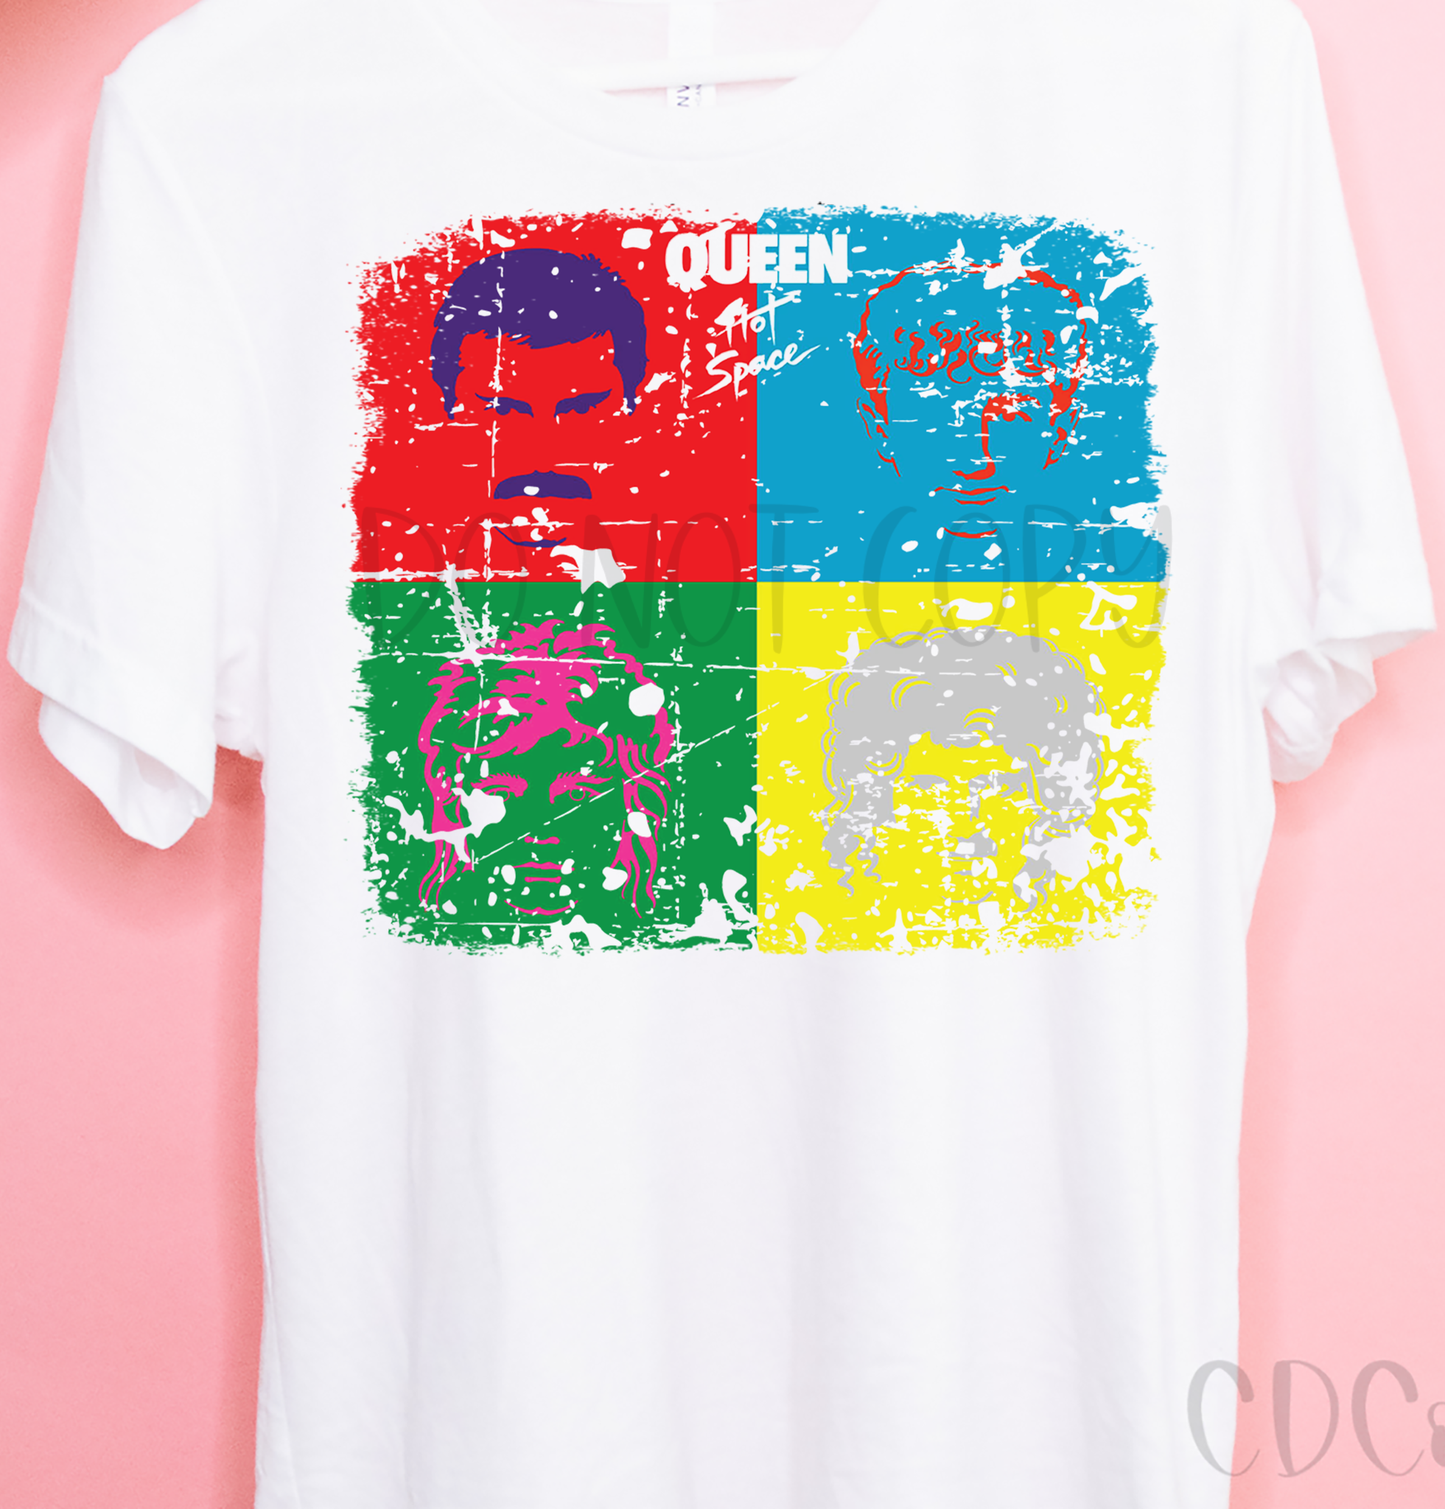 Queen Hot Space SUBLIMATION (400°)